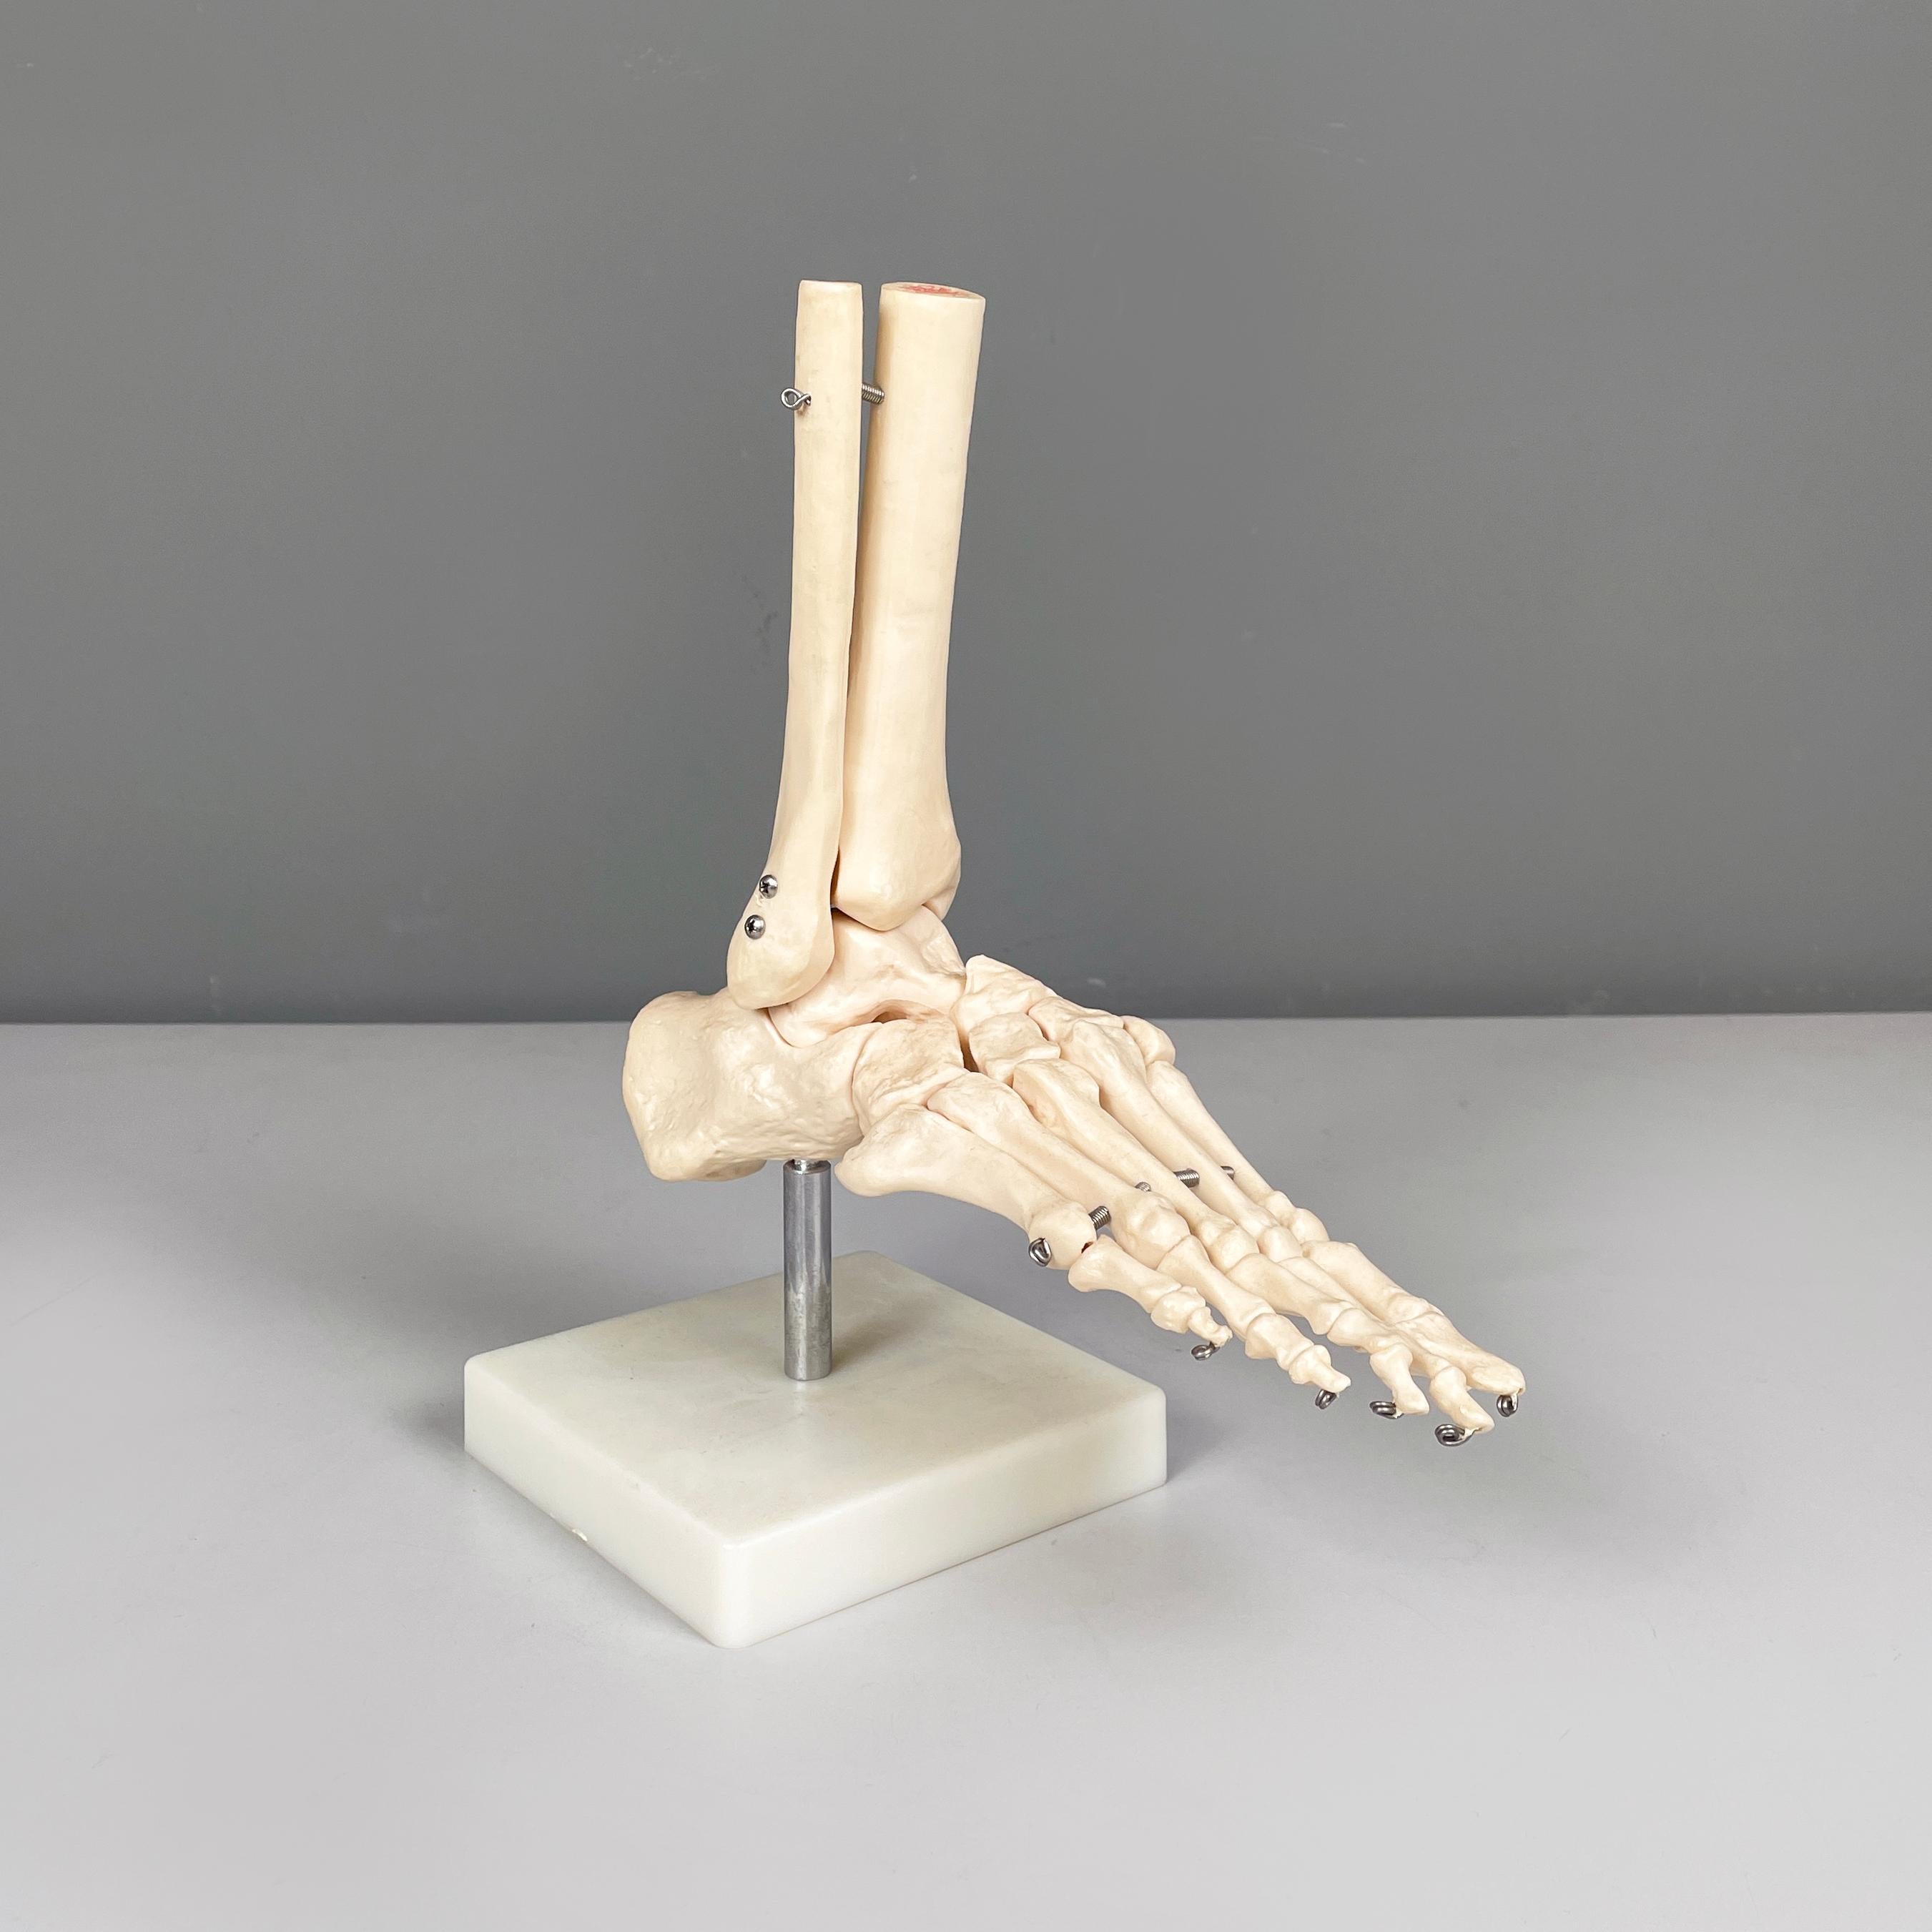 Italian modern Scientific anatomical model of the foot bones in plastic, 2000s
Scientific anatomical model of the foot and ankle bones, in white-beige plastic. The various bones are joined by small metal inserts. The structure of the sculpture is